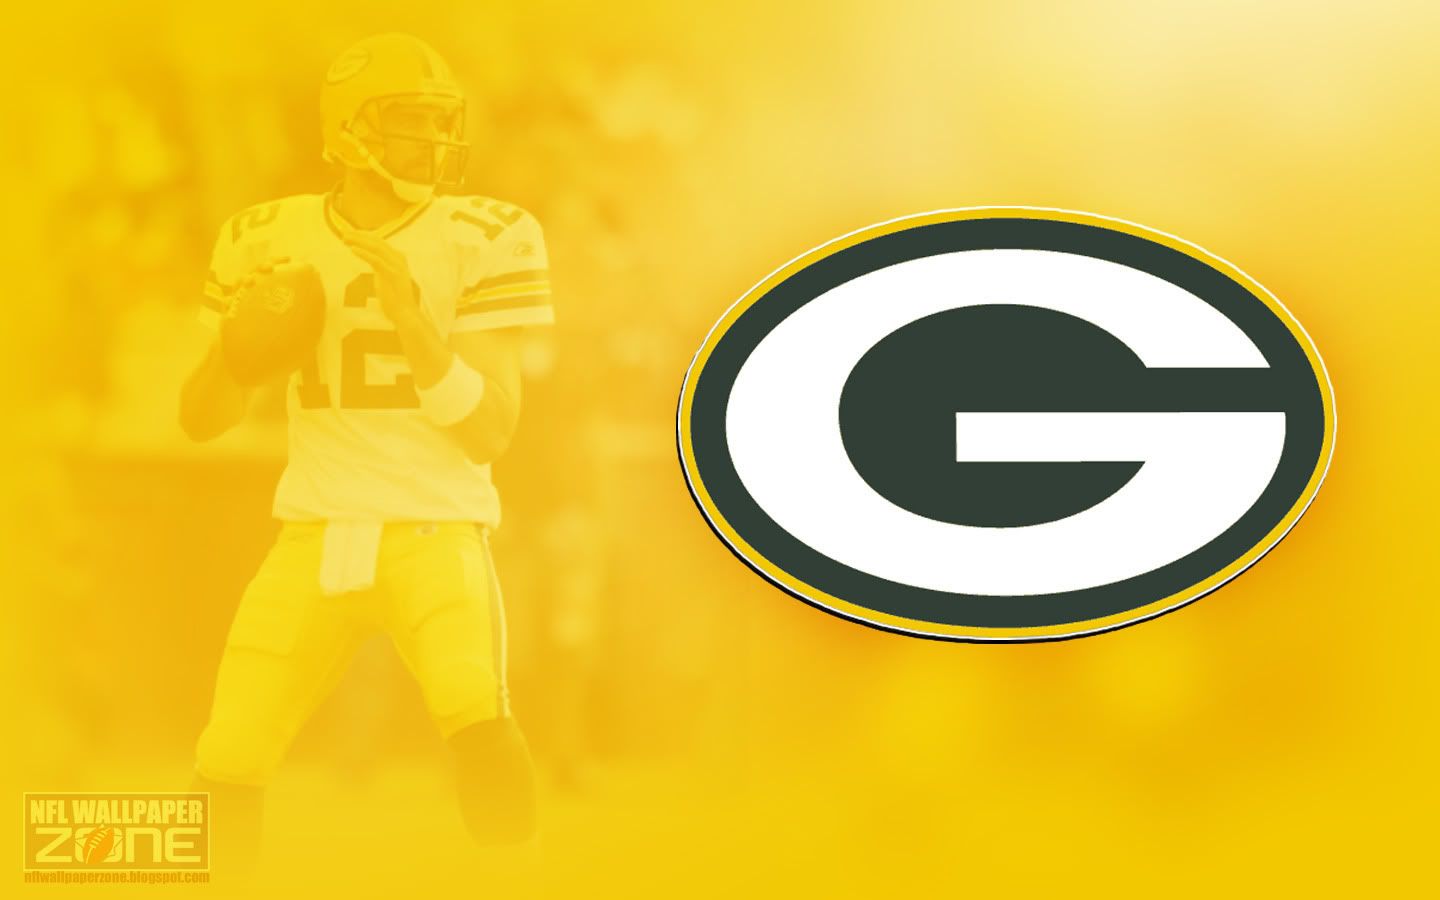 Green Bay Packers Pictures, Images & Photos Photobucket